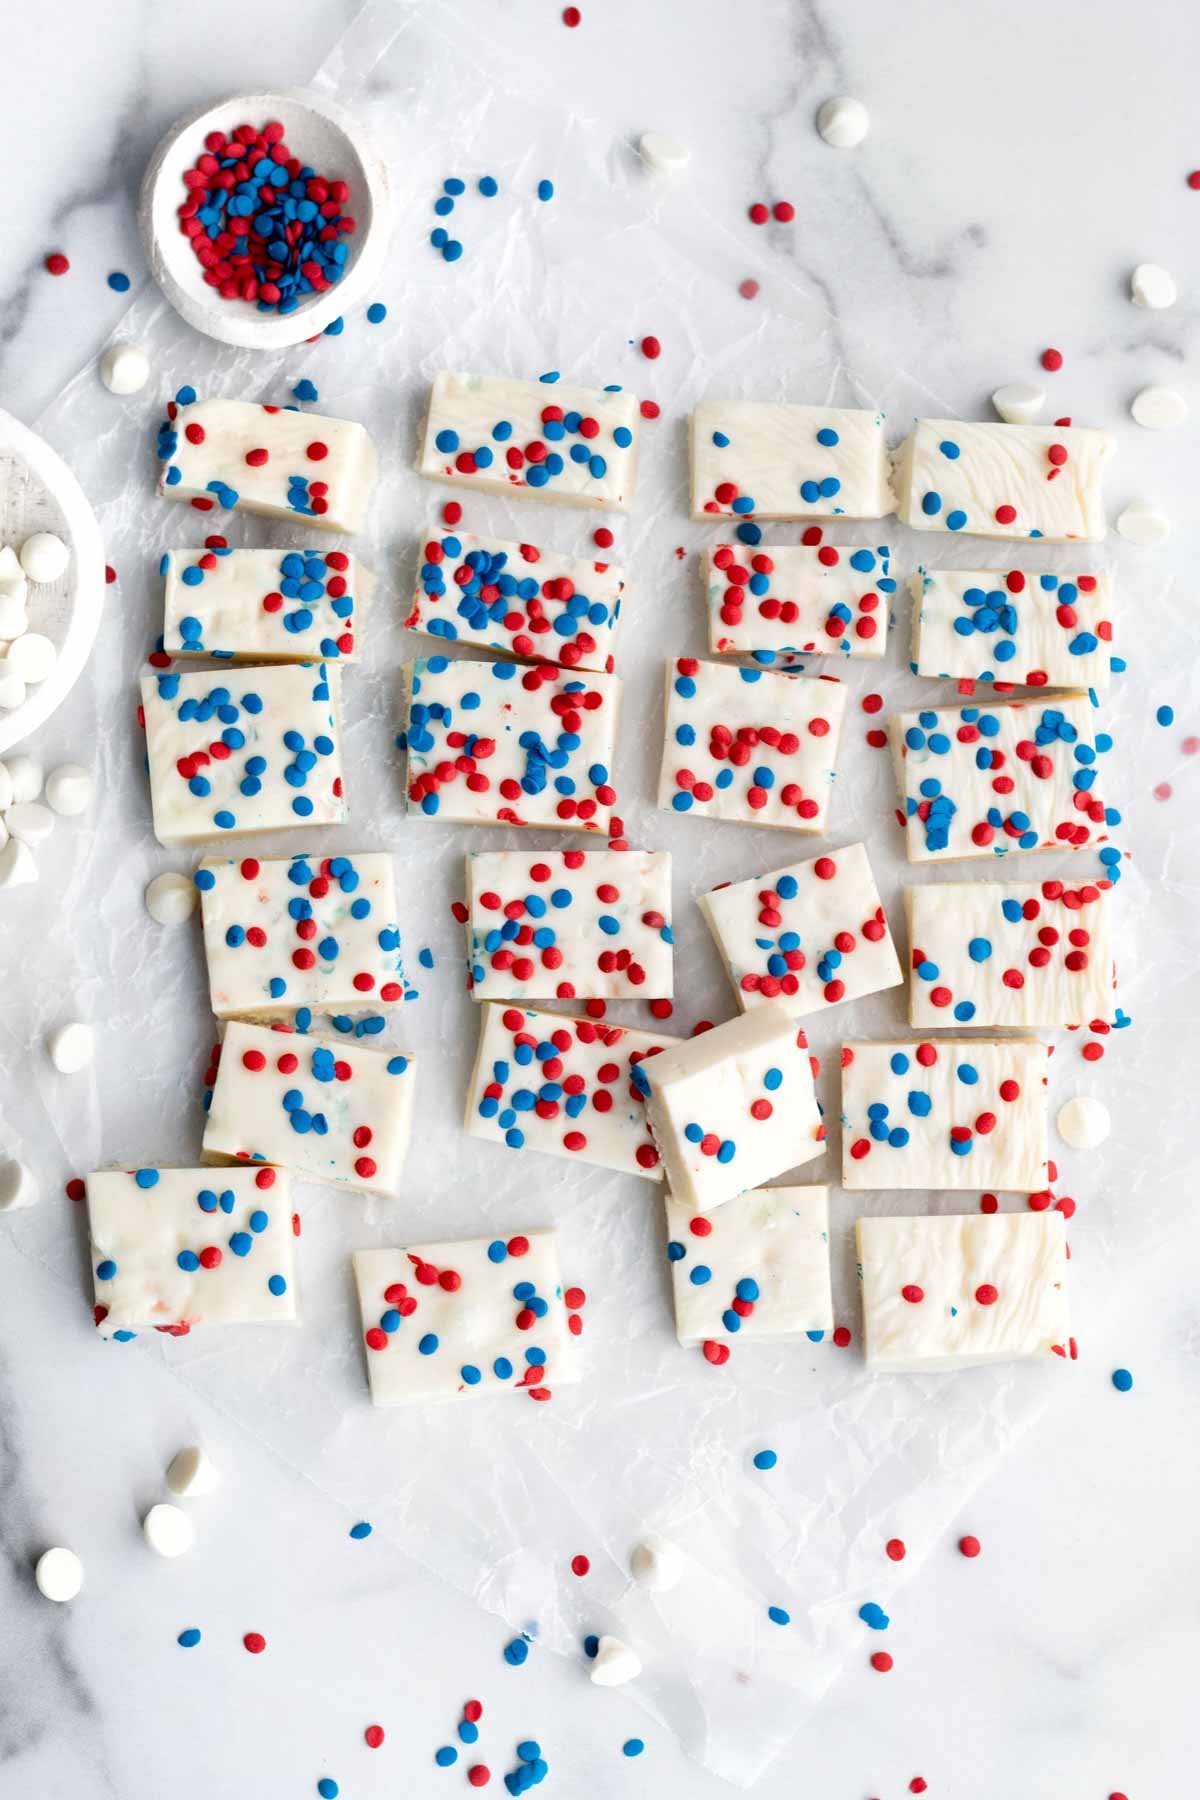 Fudge squares on marble, spaces out resembling a flag.